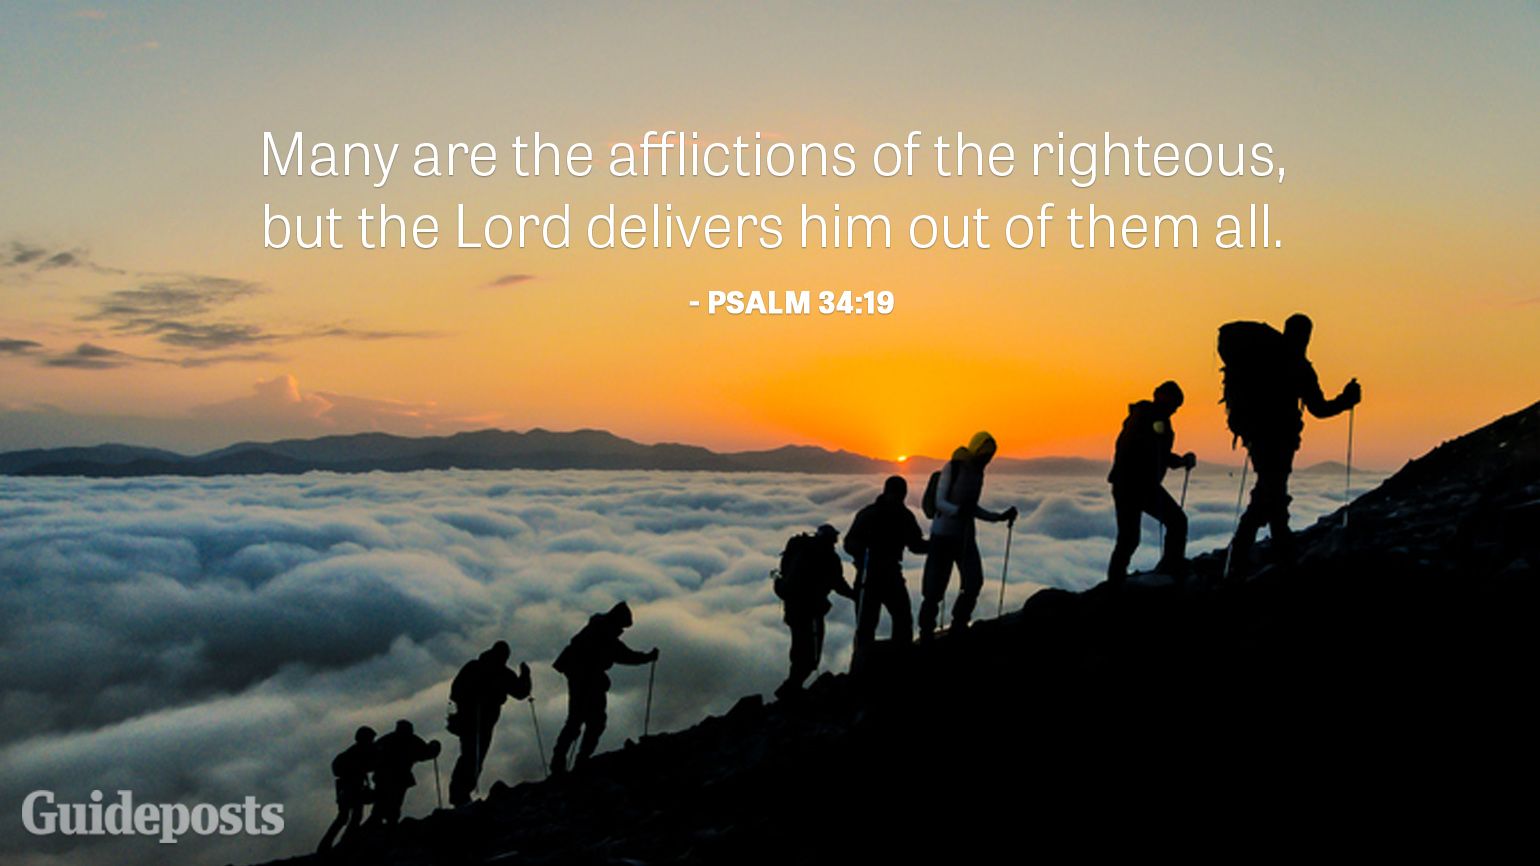 Many are the afflictions of the righteous, but the Lord delivers him out of them all.